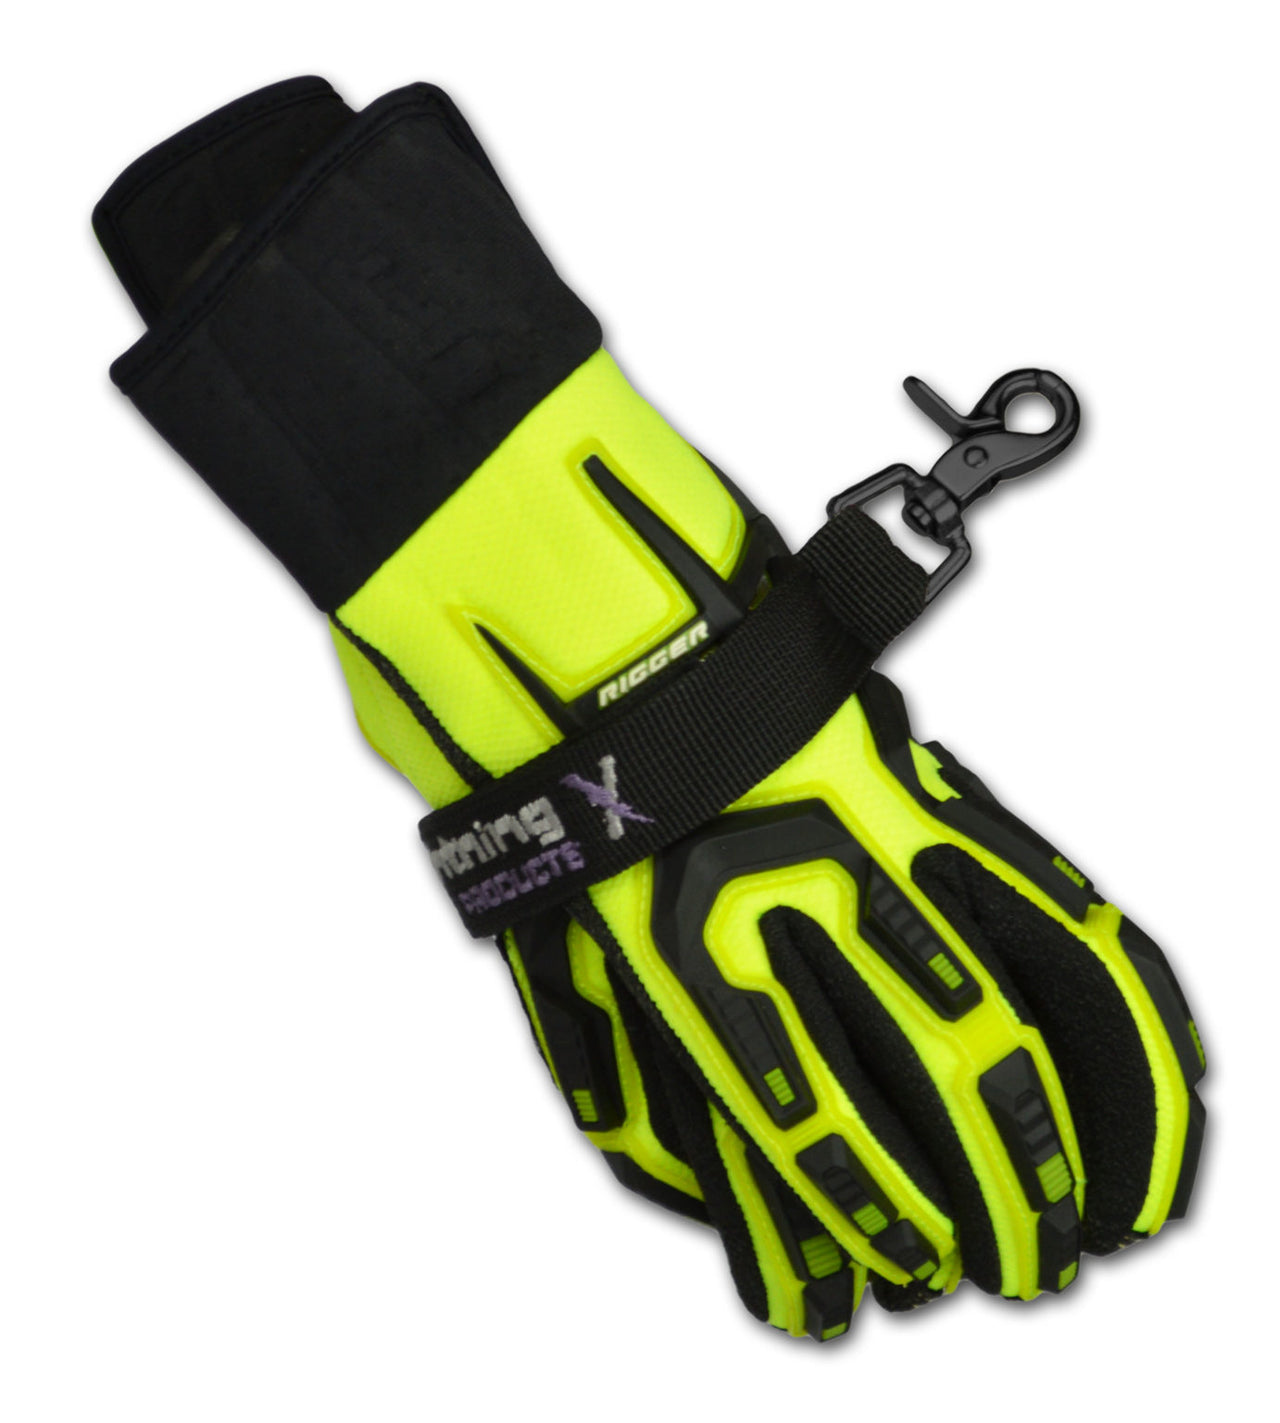 Lightning X Webbing Strap for Structural Gloves) | The Fire Center | Fuego Fire Center | Store | FIREFIGHTER GEAR | Value Nylon Webbing Strap for Structural Fire Gloves; Velcro w/ Snap Hook Attachment. Our value glove straps are great for securing your fire gloves to a convenient place on your turnout gear instead of having to ball them up in your pockets.